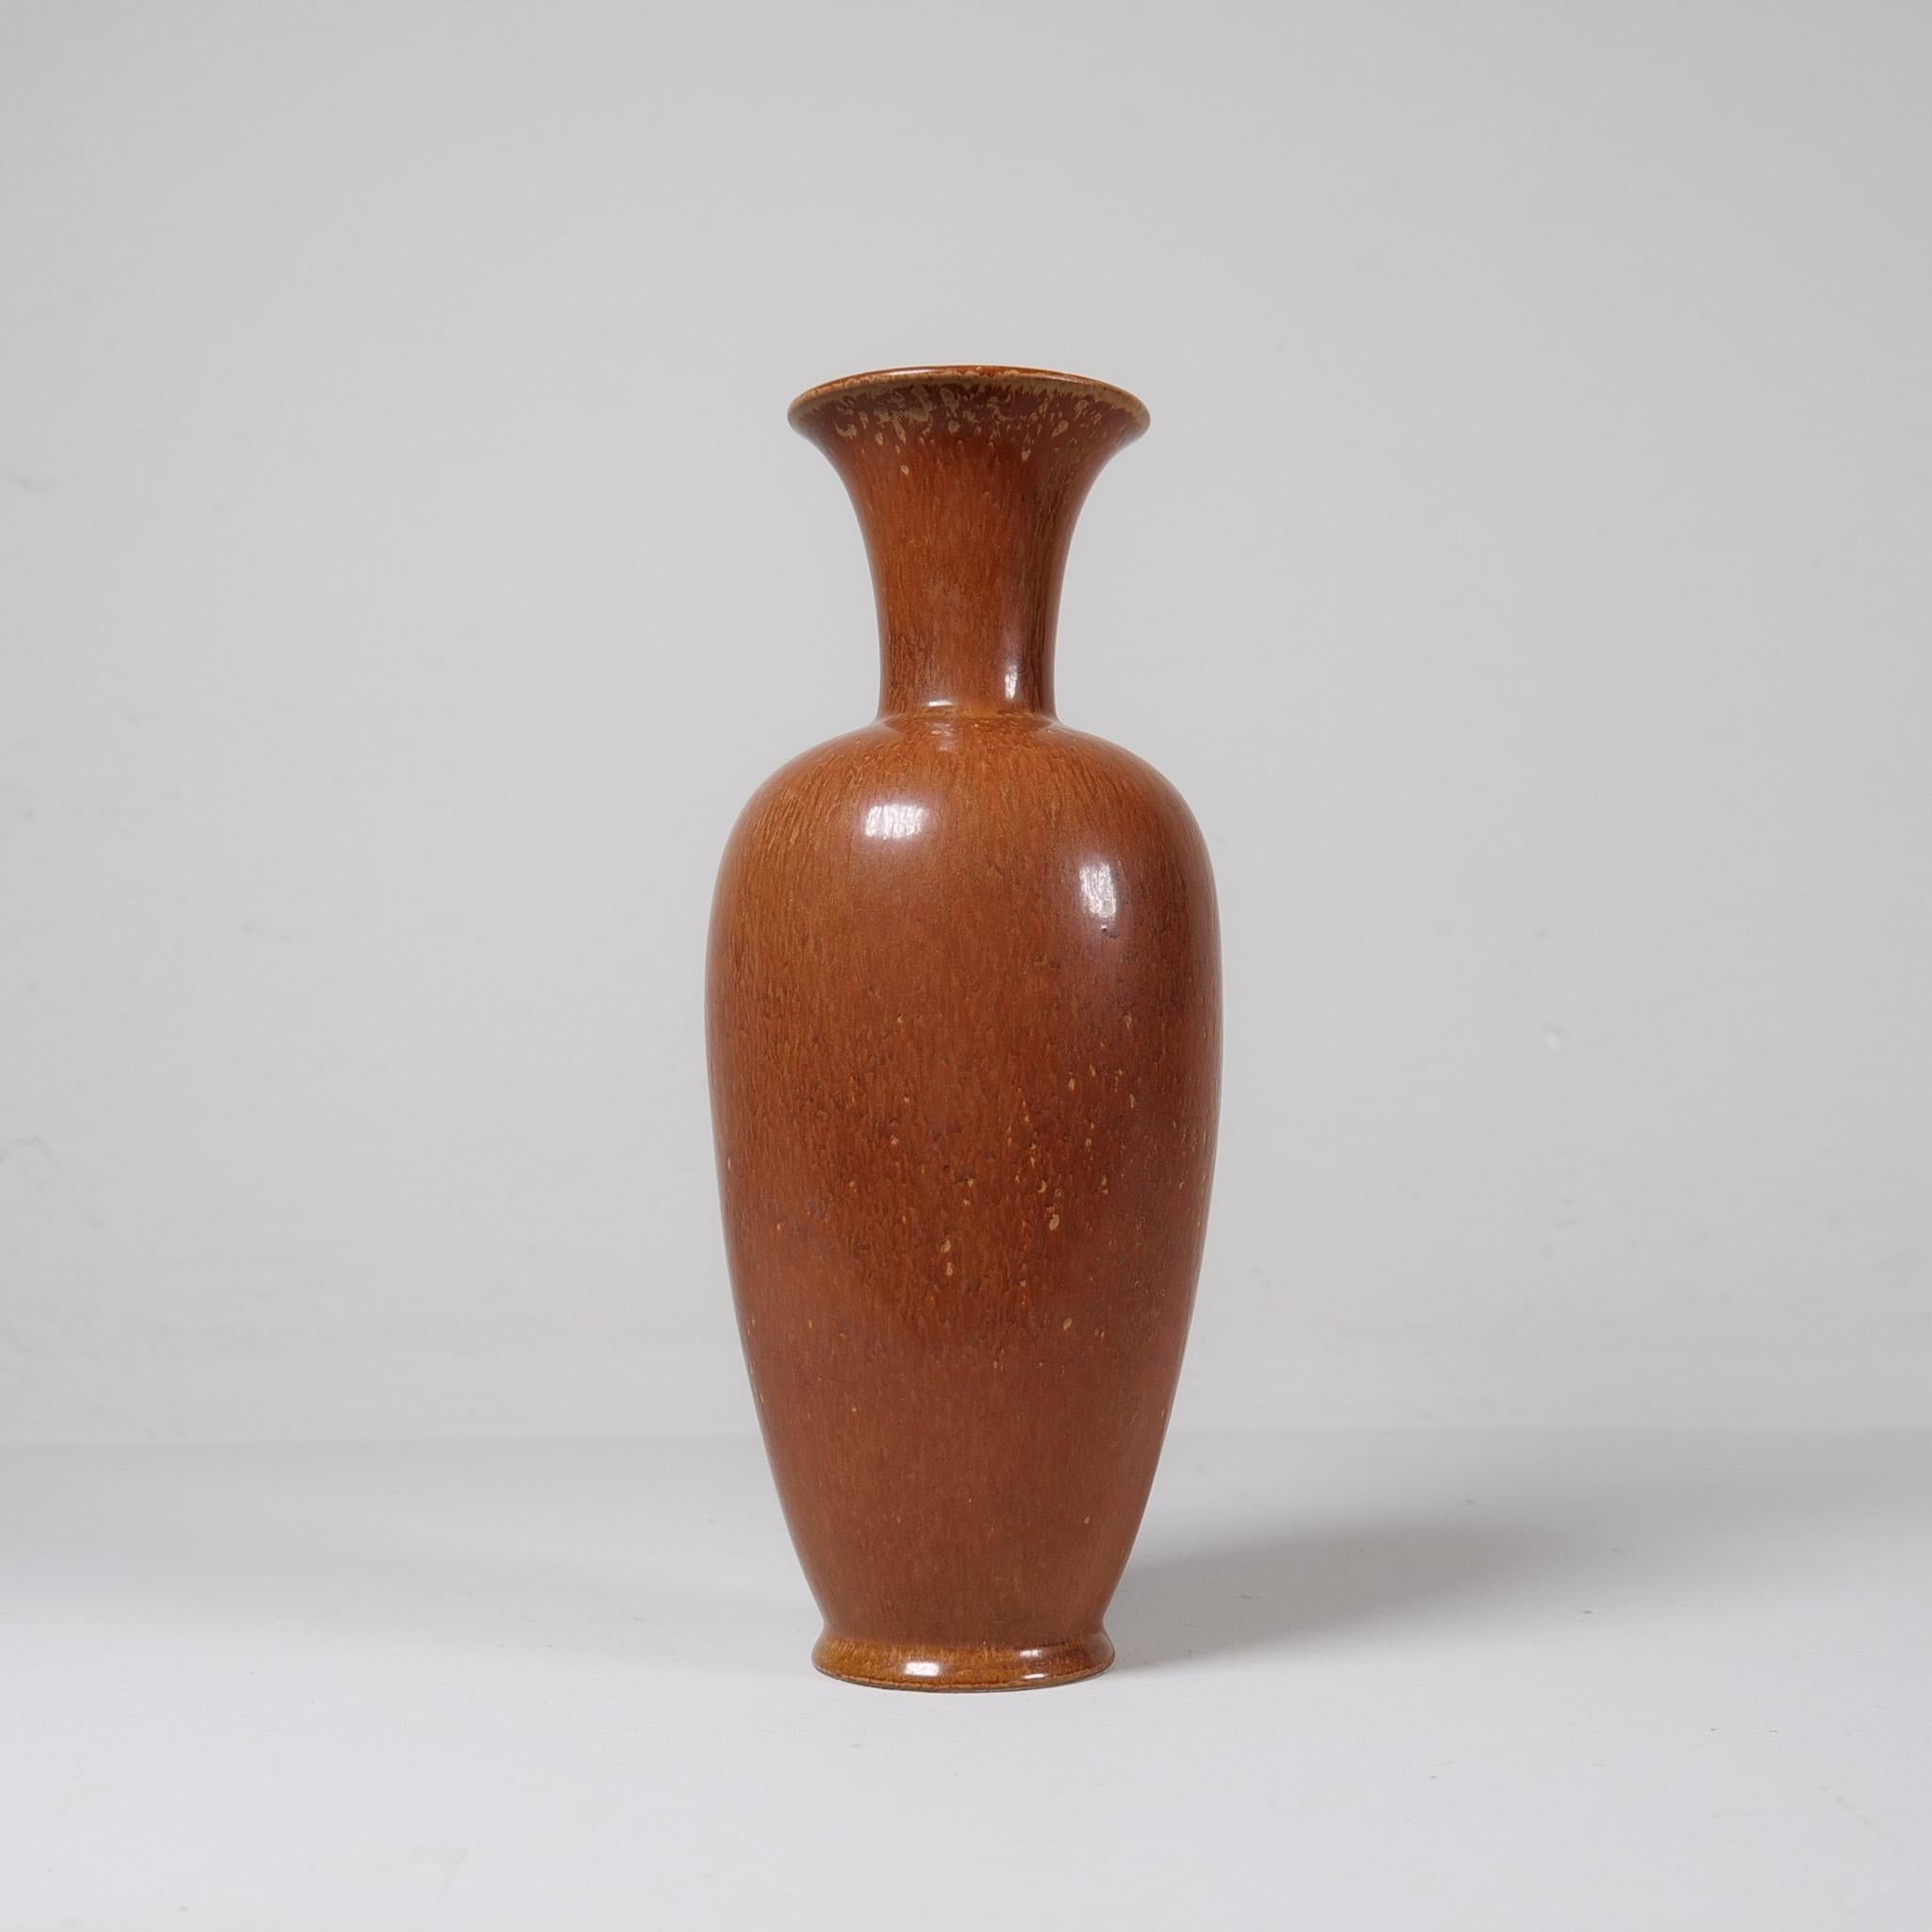 This large stoneware vase by Gunnar Nylund for Rörstrand 1950s is gifted with light brown harefur glaze. And it has that stunning look of Nylunds great craftsmanship. It really gives a great impression. 

Signed R GN SWEDEN.

Good vintage